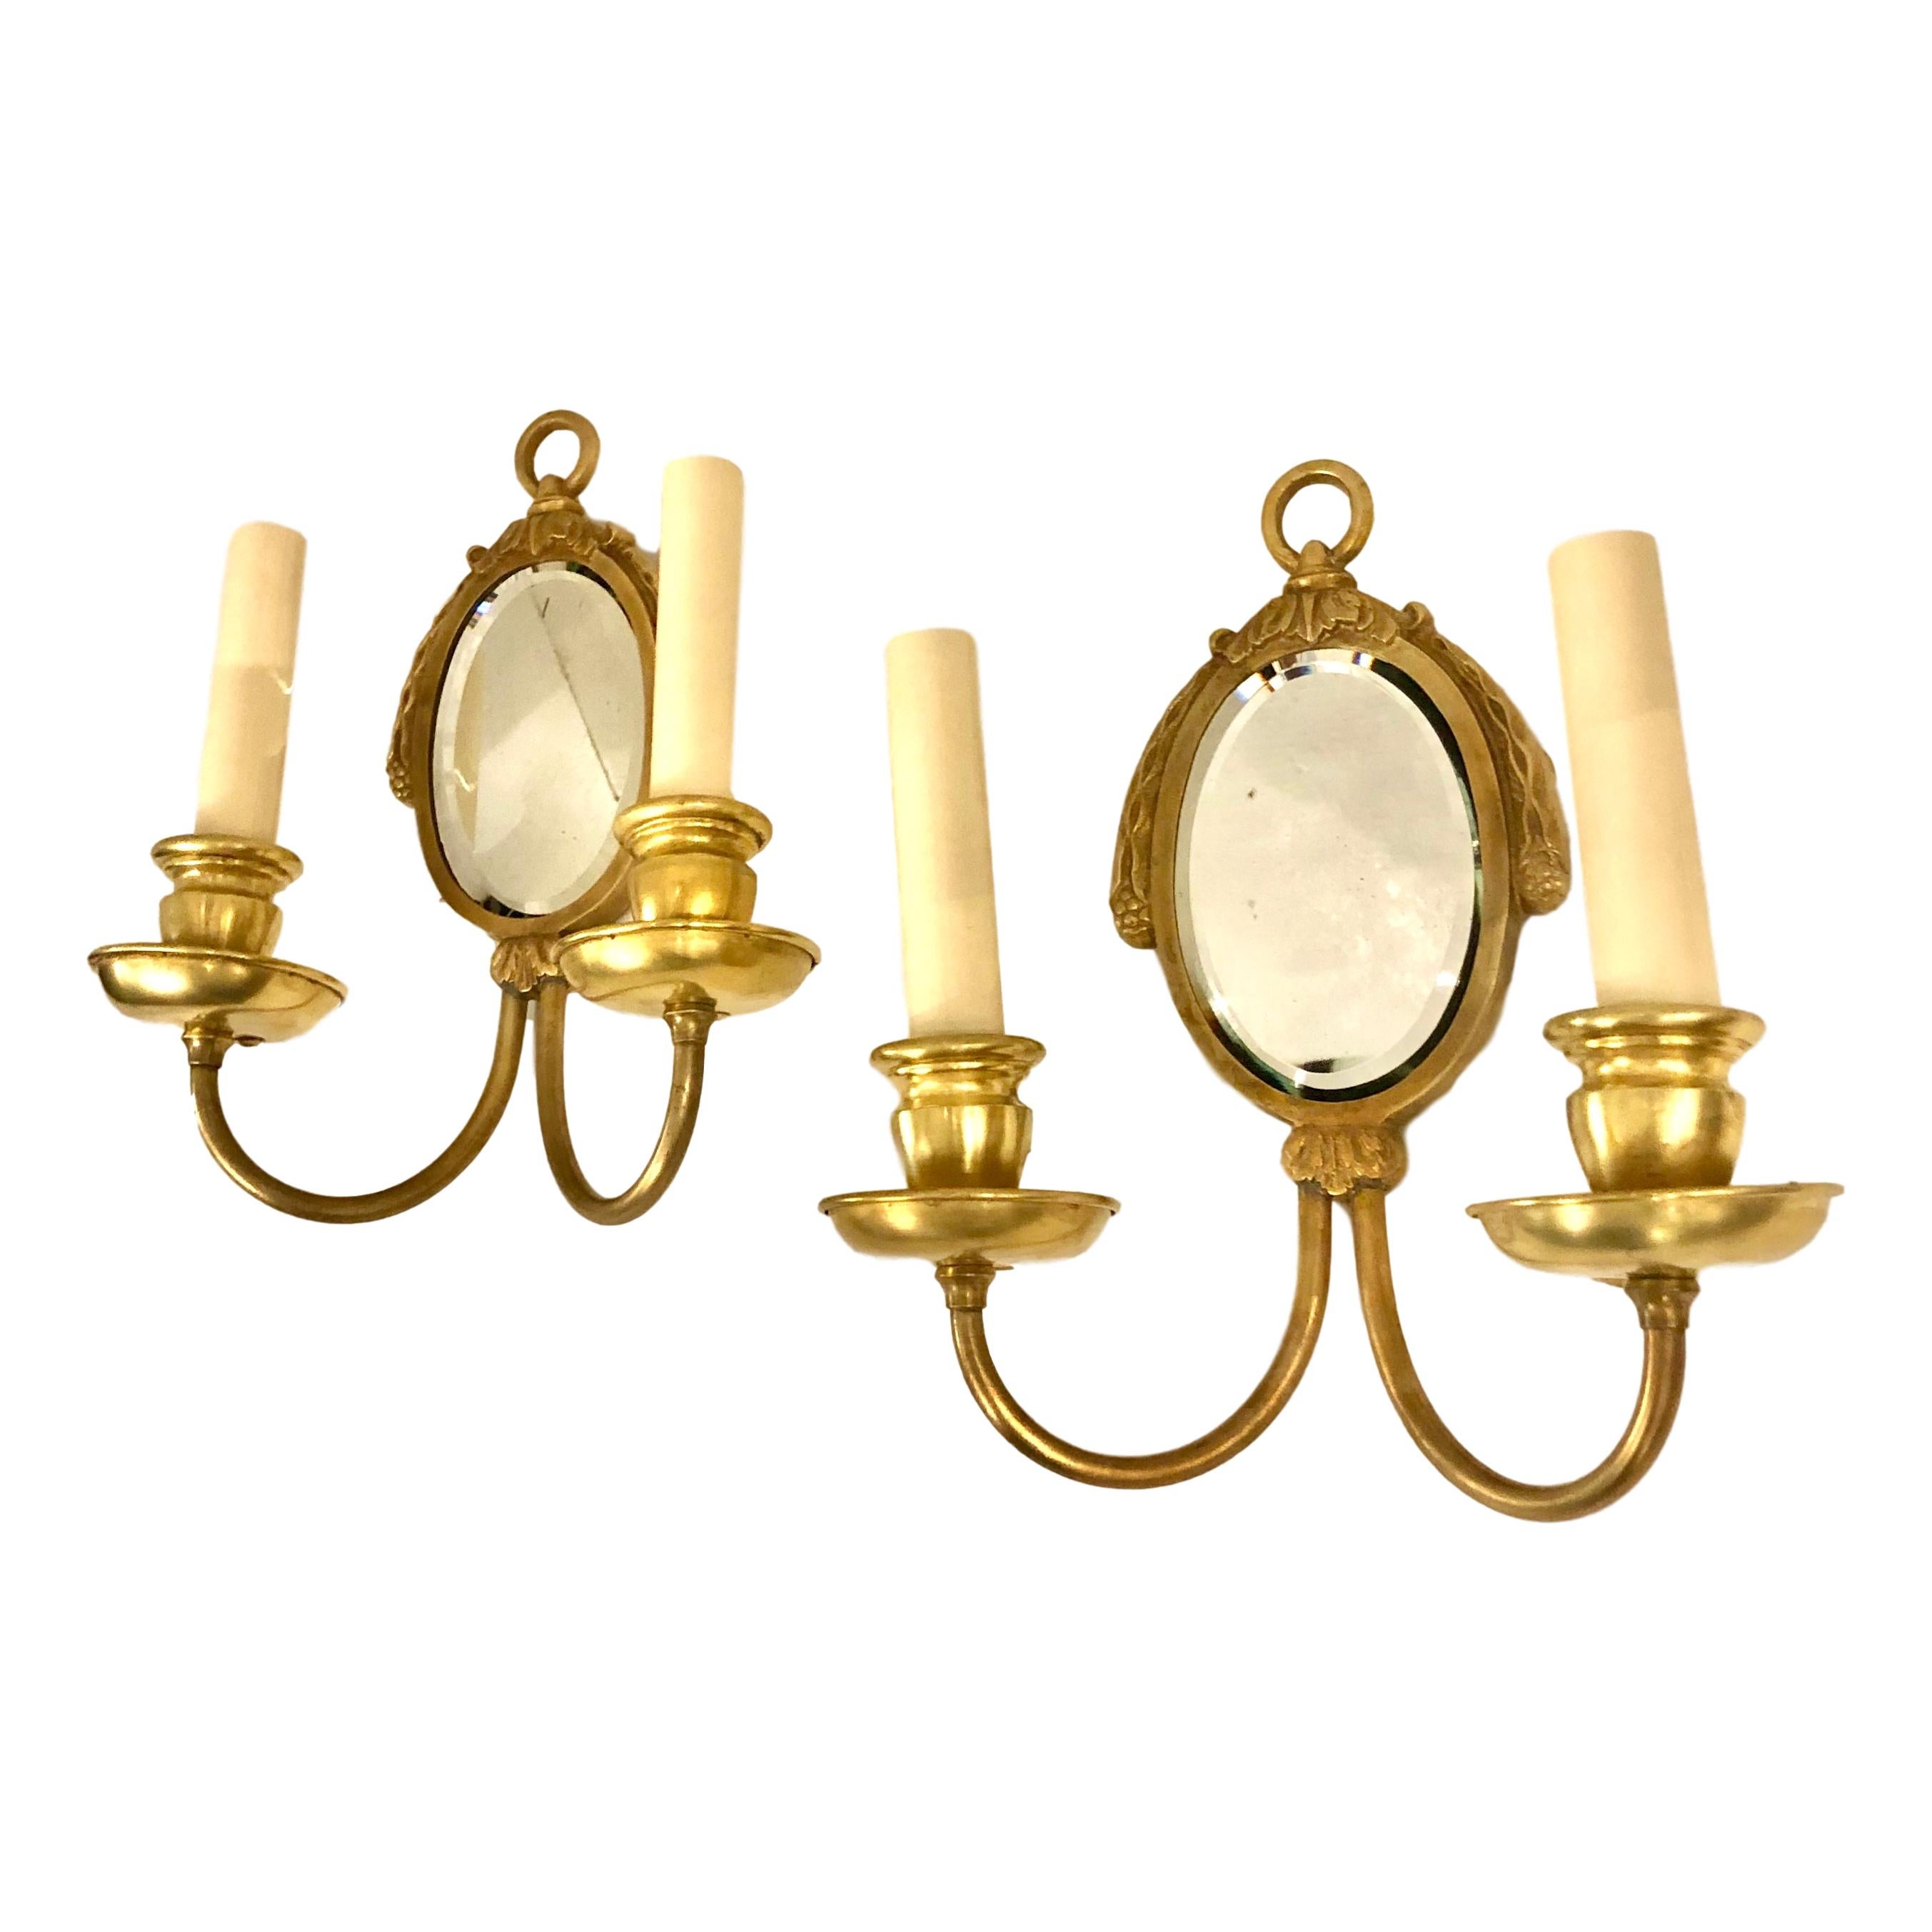 Pair of circa 1920's French gilt bronze double light sconces with mirror backs.
Measurements:
Height: 10.5